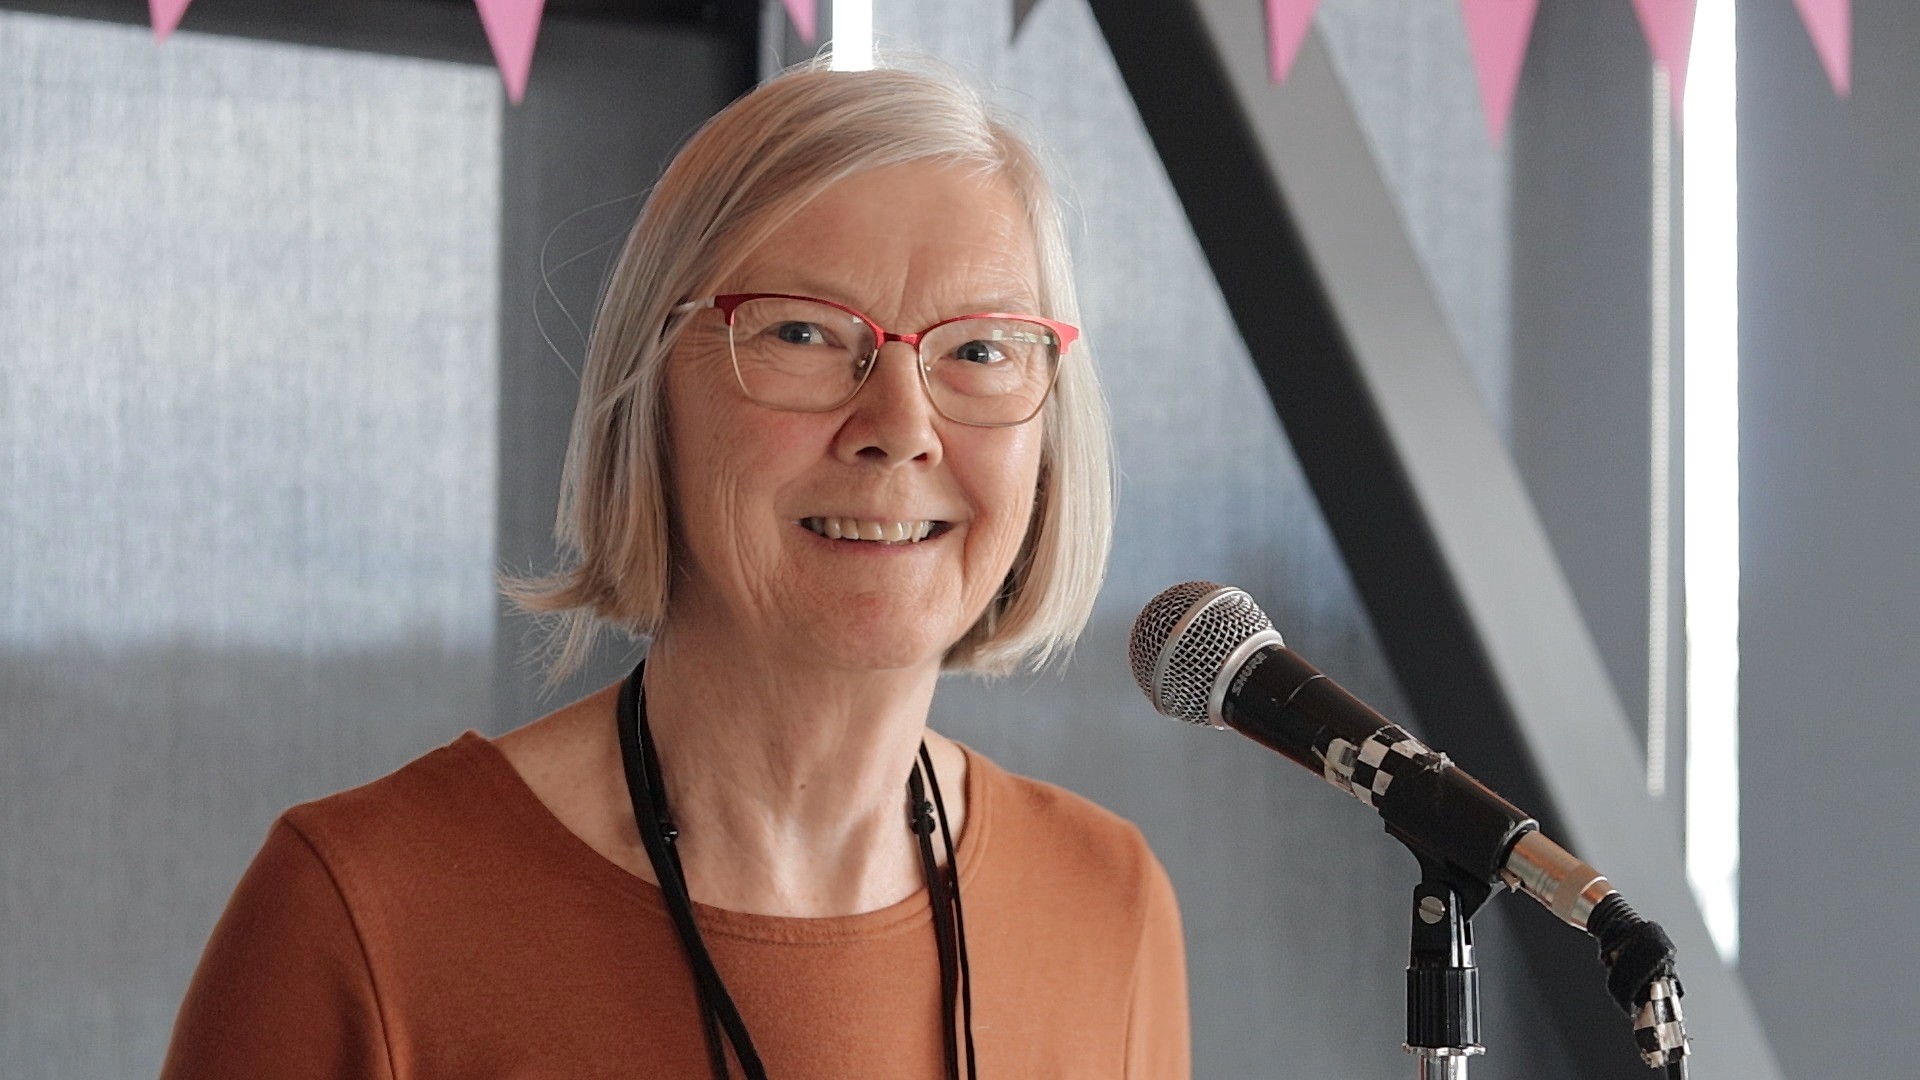 Frances Boyle, in an orange sweater and a long black necklace of many strands, stands in front of the a microphone on a stand; she has chin length white-grey hair and thin-rimmed glasses, and she looks away from the mic to smile at the camera